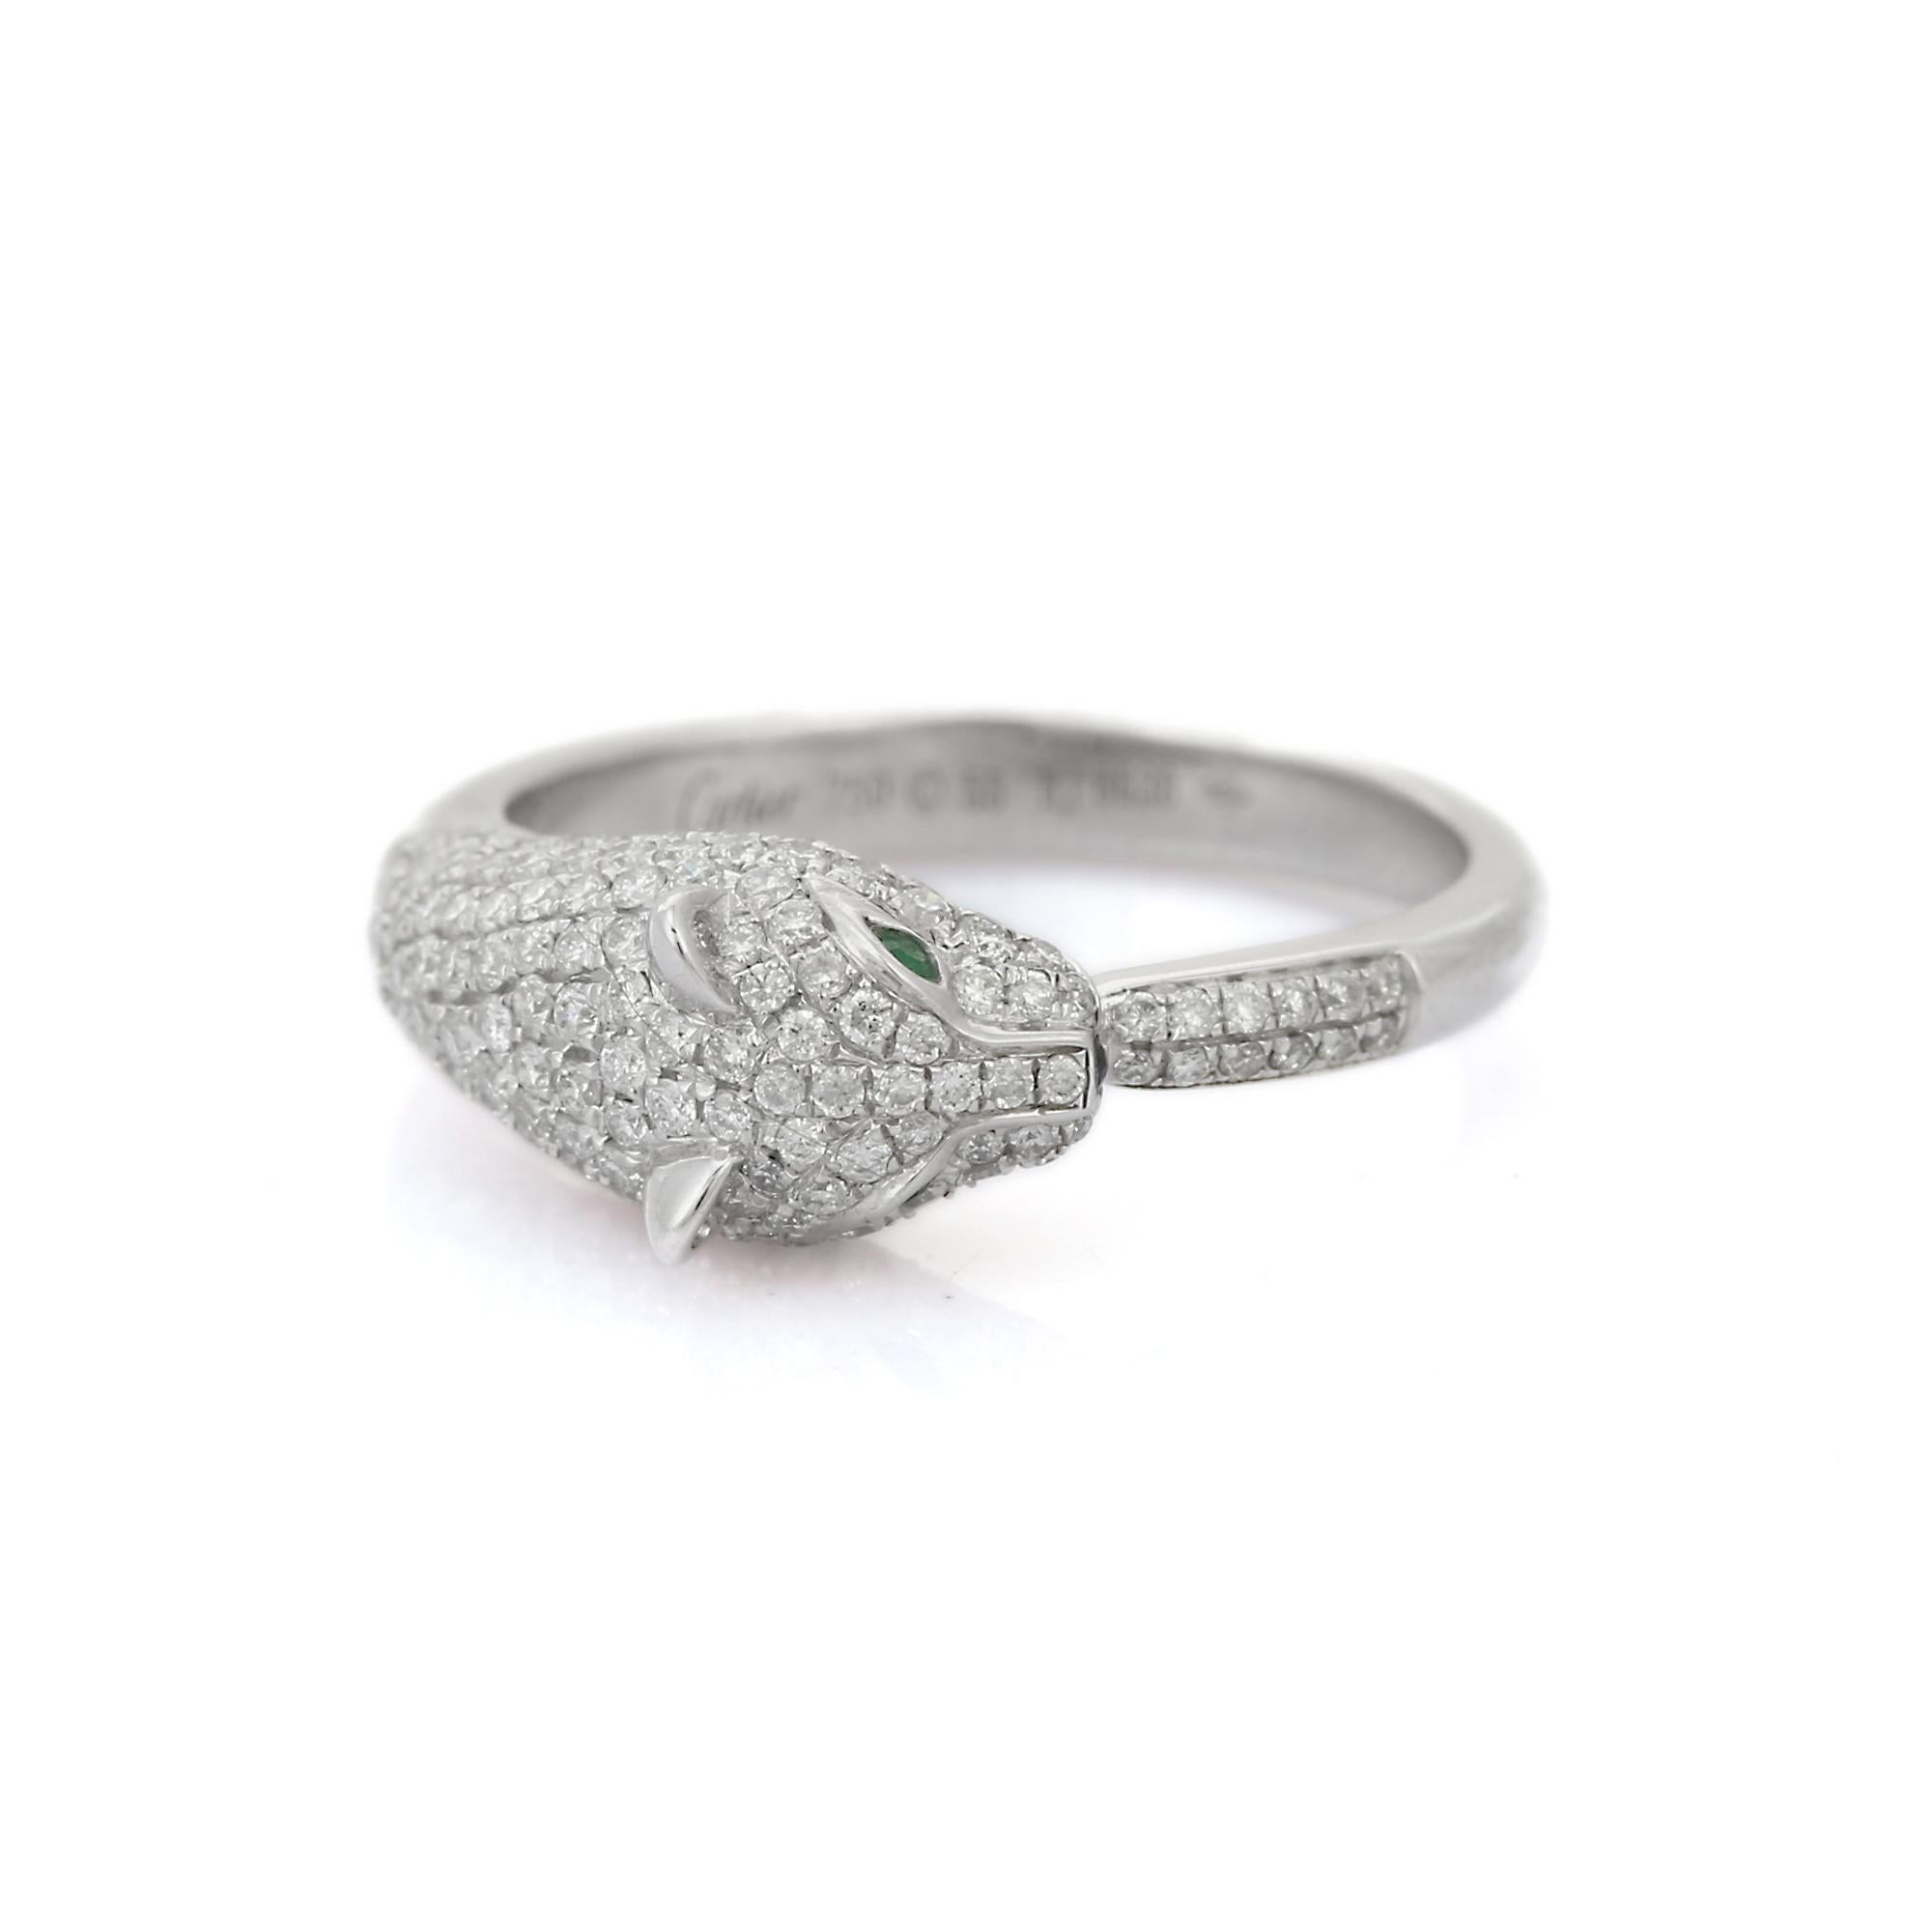 For Sale:  18K White Gold Panther Animal Cocktail Ring with Emerald, Sapphire and Diamonds 7